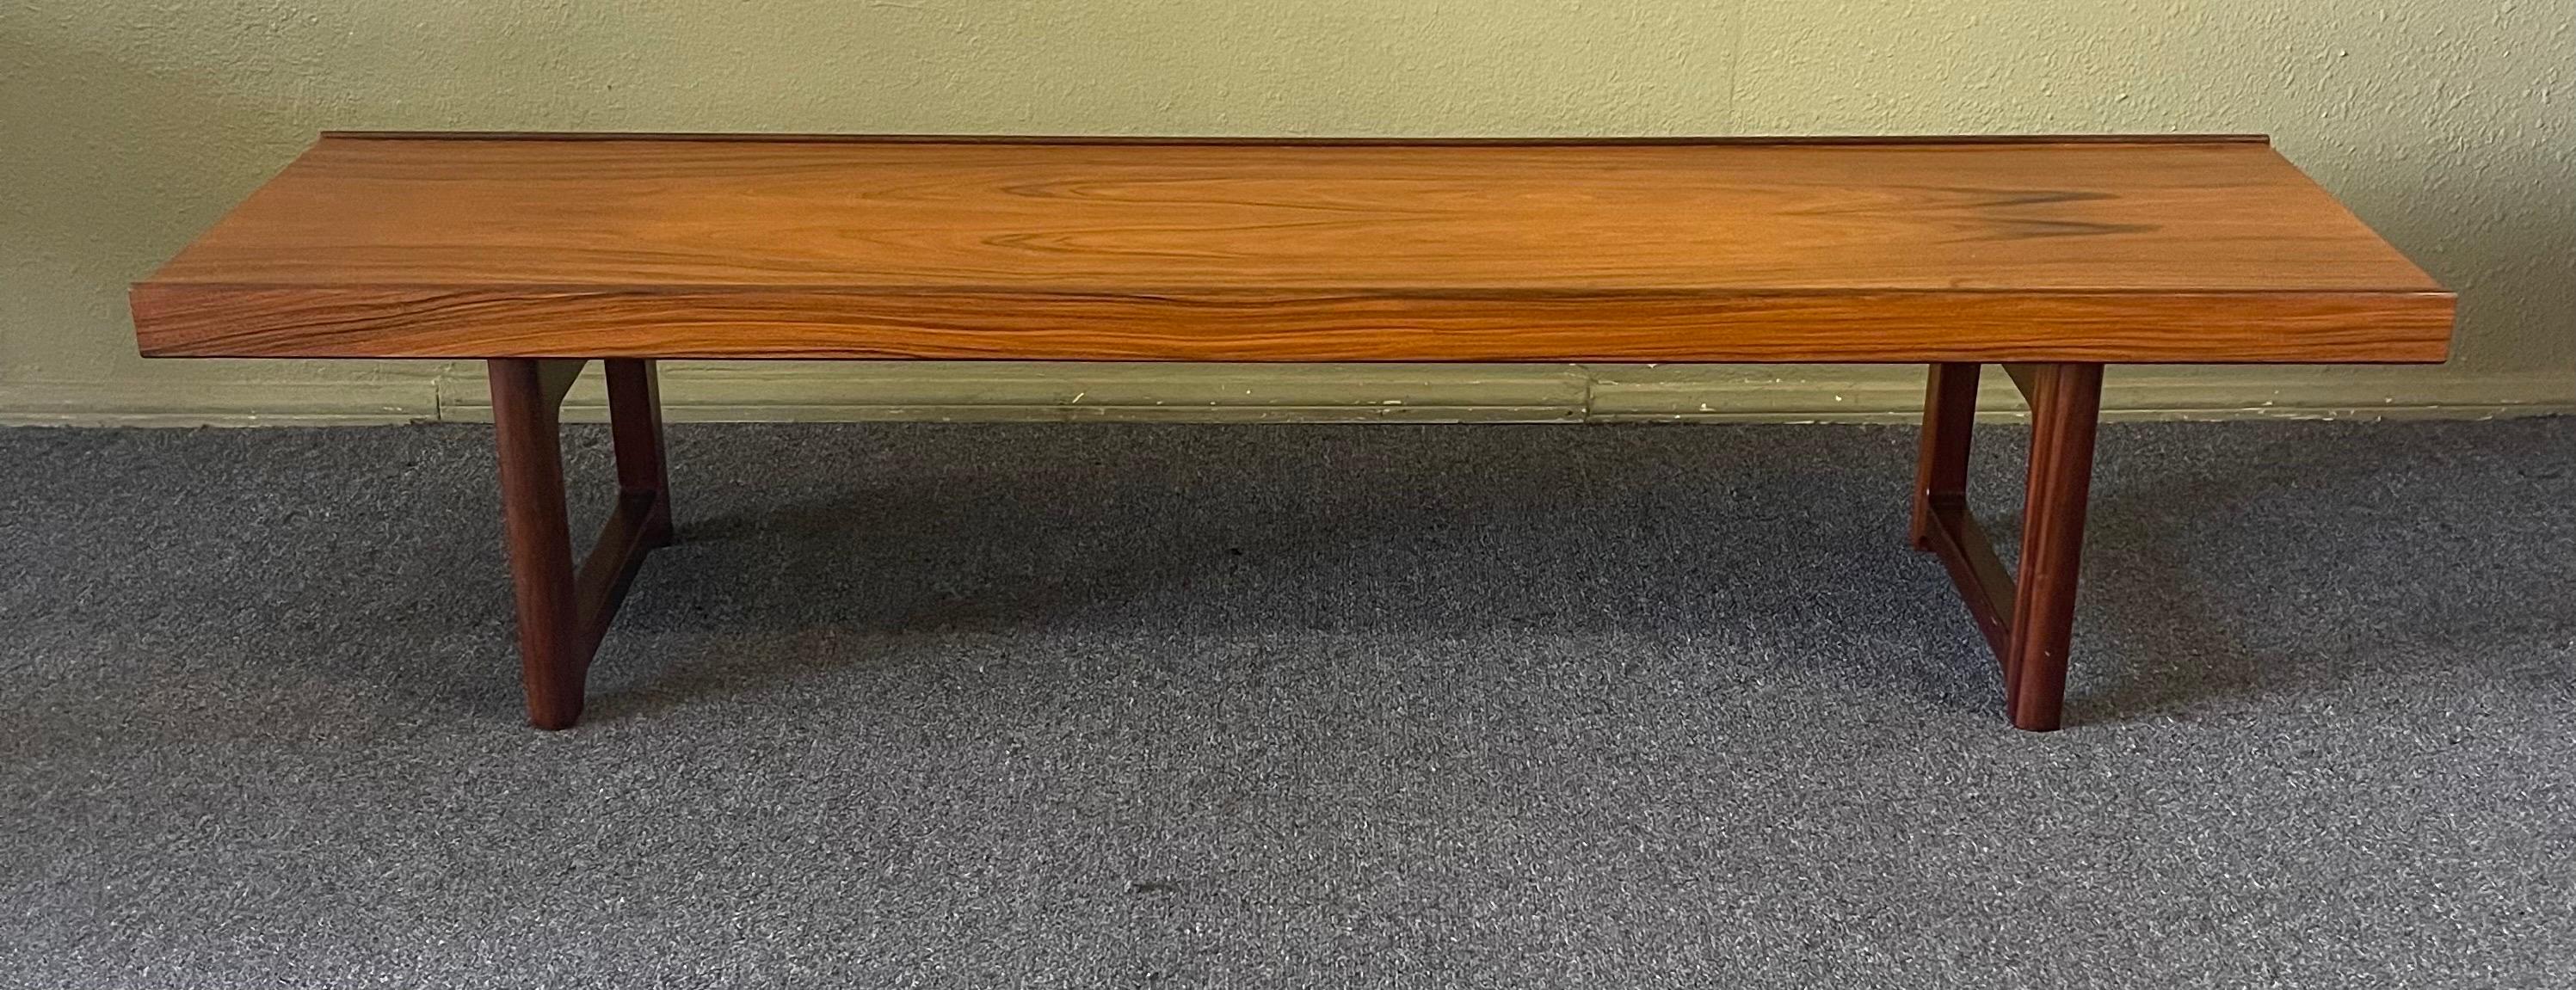 Low Profile Bench / Coffee Table in Rosewood by Torbjørn Afdal for Bruksbo For Sale 2